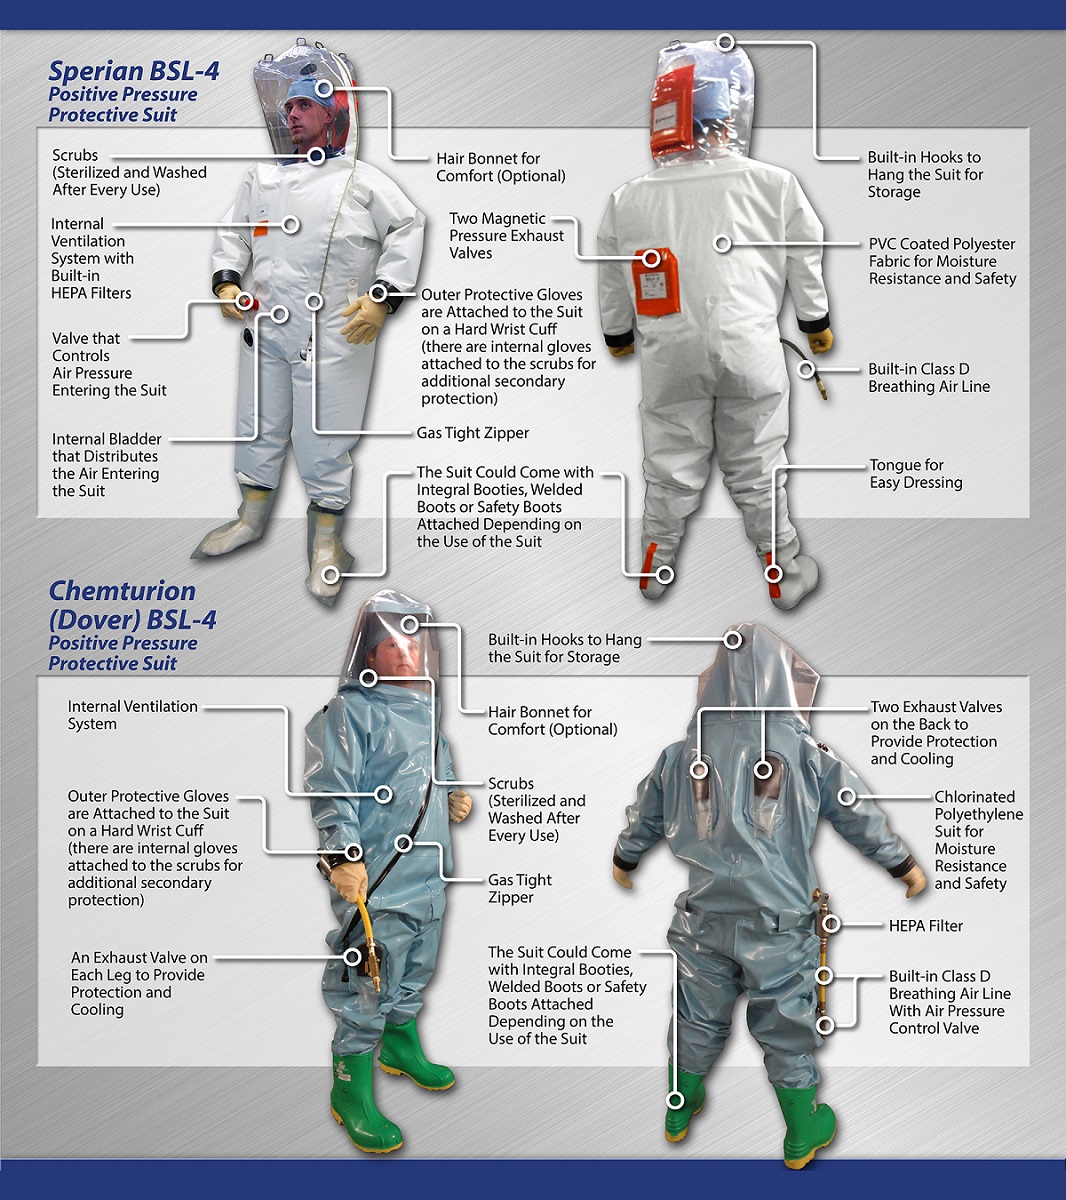 This graphic depicts the back and front of two different models of Positive Pressure Protective Suits worn by researchers and scientists at Department of Homeland Security (DHS) Science and Technology Directorate’s (S&T) National Biodefense Analysis and Countermeasures Center, or NBACC. Both suits are worn in a Biosecurity Level 4, or BS-4, environment. The first suit is the Sperian BSL-4 Positive Pressure Protective Suit. It is mostly white in color with a few orange accents, and the graphic points out the following features on the front view:  Scrubs (sterilized and washed after every use); Hair bonnet for comfort (optional); Internal ventilation system with built-In HEPA filters; Valve that controls air pressure entering the suit; Internal bladder that distributes the air entering the suit; Outer protective gloves are attached to the suit on a hard wrist cuff (there are internal gloves attached to the scrubs for additional secondary protection); Gas tight zipper; and The suit could come with integral booties, welded boots, or safety boots attached depending on the use of the suit. (This feature is demonstrated on the front and back views) Features highlighted on the Sperian suit’s back view include: Built-in hooks to hang the suit for storage; PVC-coated polyester fabric for moisture-resistance and safety;  Built-in Class D breathing air line; Tongue on the boot for easy dressing; and Two magnetic pressure exhaust valves on the back.  The second suit shown (front and back views) is the Chemturion (Dover) BSL-4 Positive Pressure Protective Suit. This is mostly light blue in color, and the image depicts green boots. Features highlighted on the front view include: Scrubs (sterilized and washed after every use); Hair bonnet for comfort (optional); Internal ventilation system; Outer protective gloves are attached to the suit on a hard wrist cuff (there are internal gloves attached to the scrubs for additional secondary protection); Gas tight zipper; and An exhaust valve on each leg to provide protection and cooling. Features highlighted on the Chemturion suit’s back view include: Built-in hooks to hang the suit for storage; Two exhaust valves on the back to provide protection and cooling; Chlorinated Polyethylene suit for moisture-resistance and safety;  HEPA filter; Built-in Class D breathing air line with pressure control valve; and  The suit could come with integral booties, welded boots, or safety boots attached depending on the use of the suit.